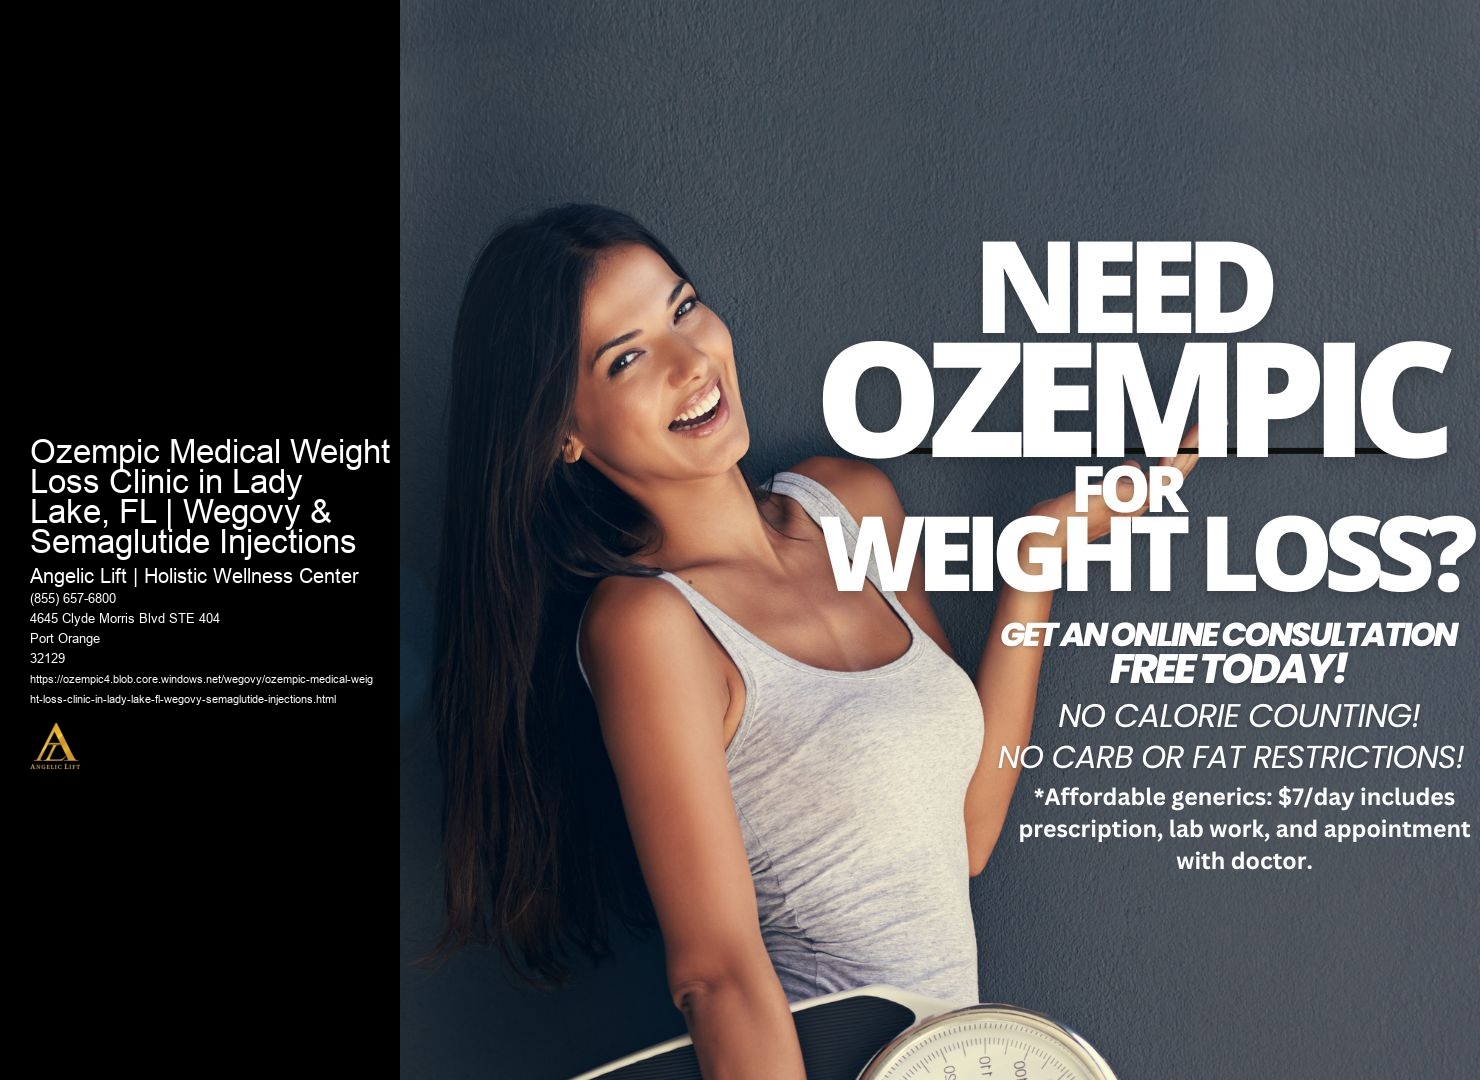 Ozempic Medical Weight Loss Clinic in Lady Lake, FL | Wegovy & Semaglutide Injections